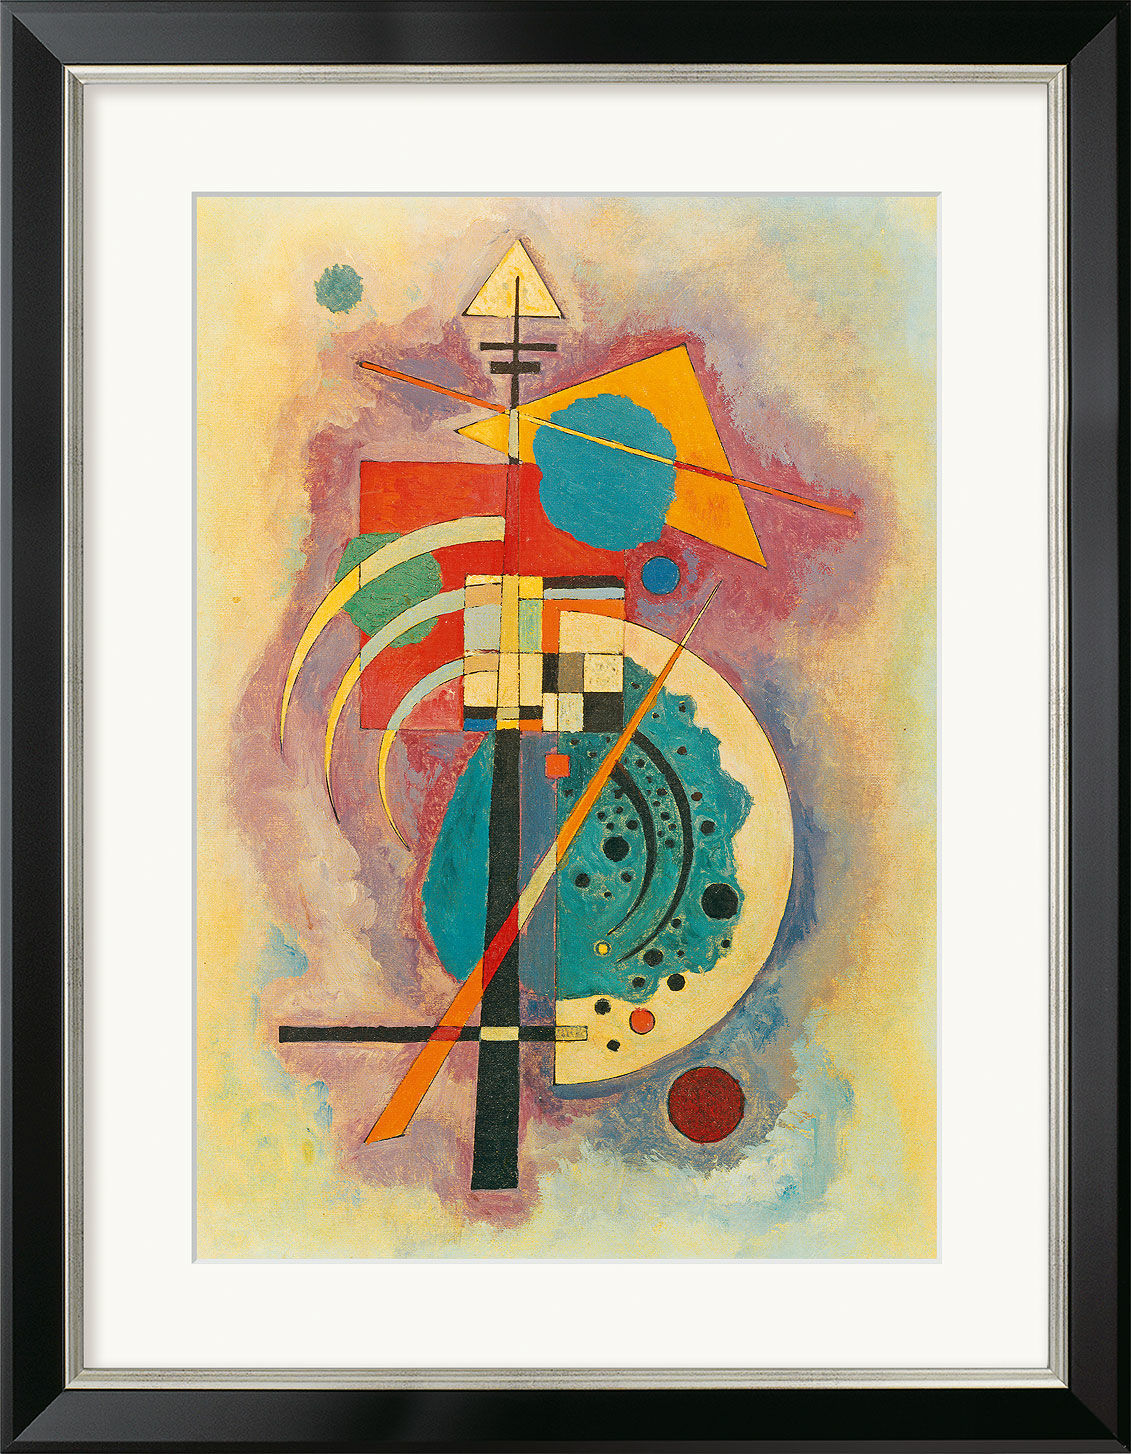 Picture "Hommage à Grohmann" (1926), framed by Wassily Kandinsky